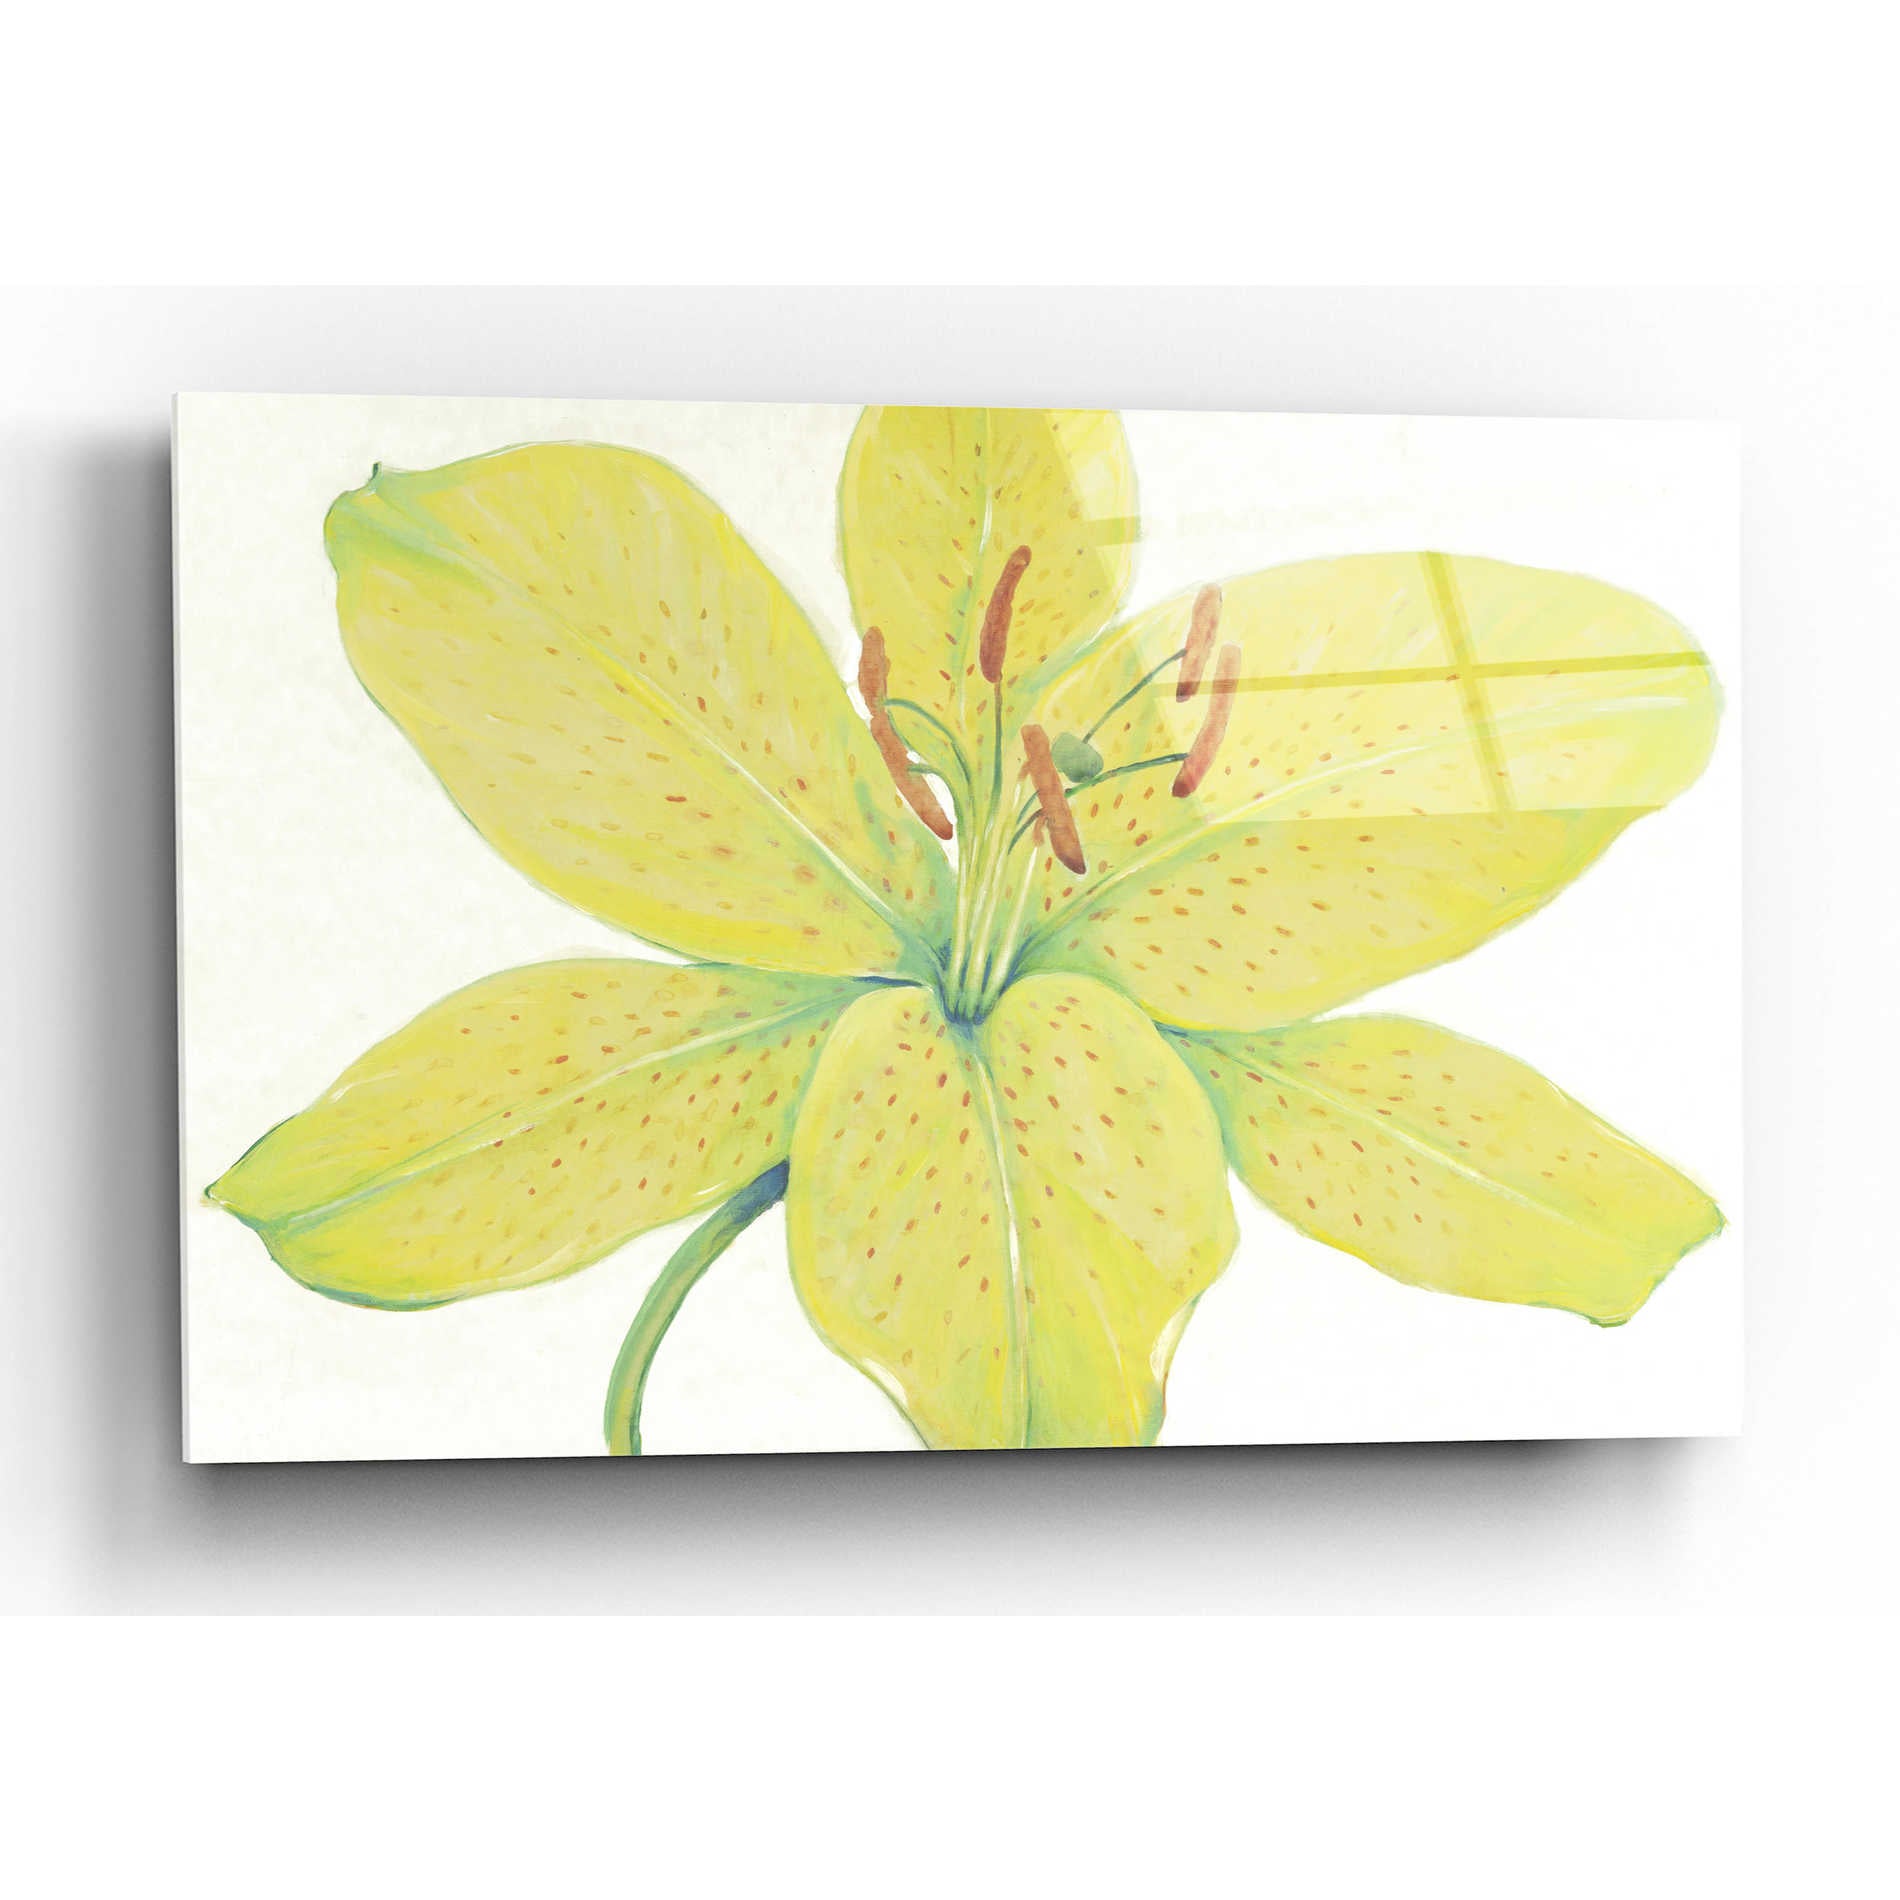 Epic Art 'Citron Tiger Lily I' by Tim O'Toole, Acrylic Glass Wall Art,24x16